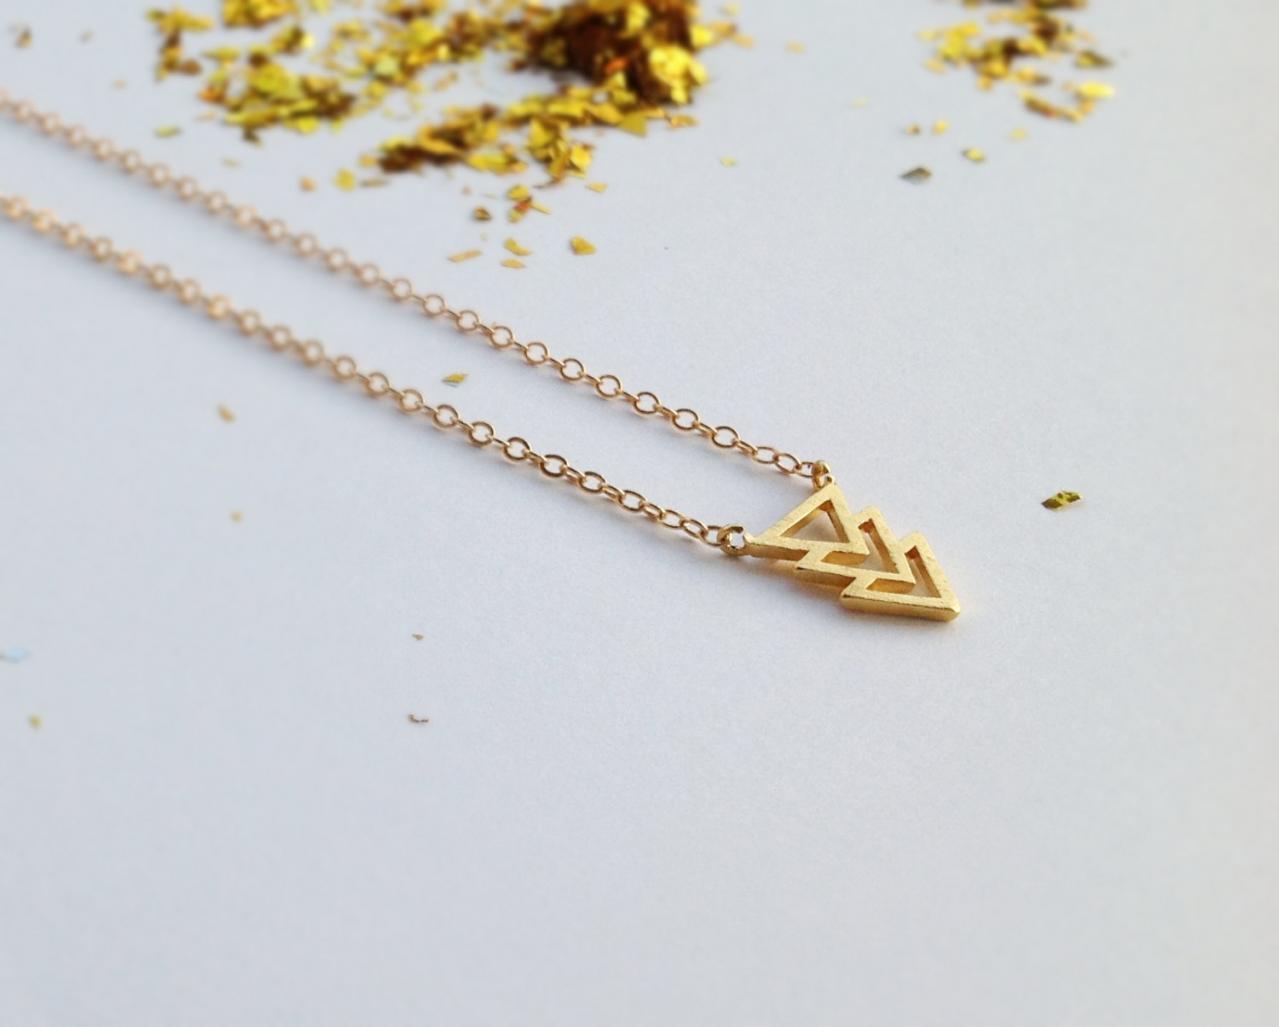 Gold Necklace, Arrow Necklace, Gold Arrow Necklace, Dainty Necklace, Everyday Necklace,1 Gift For Her - 801